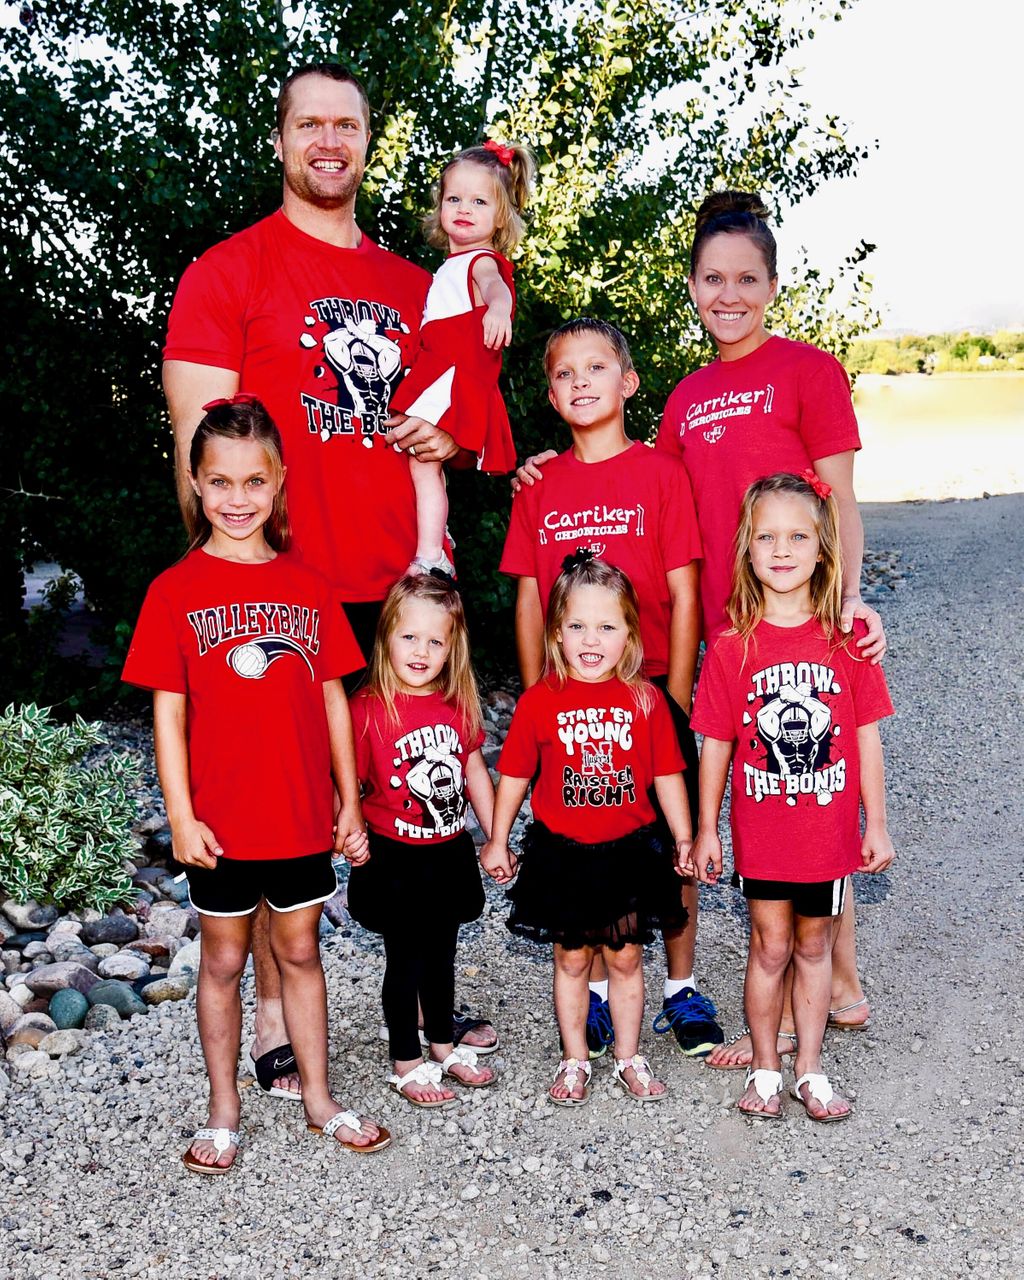 Adam Carriker on X: 'The Carriker family is still proudly wearing